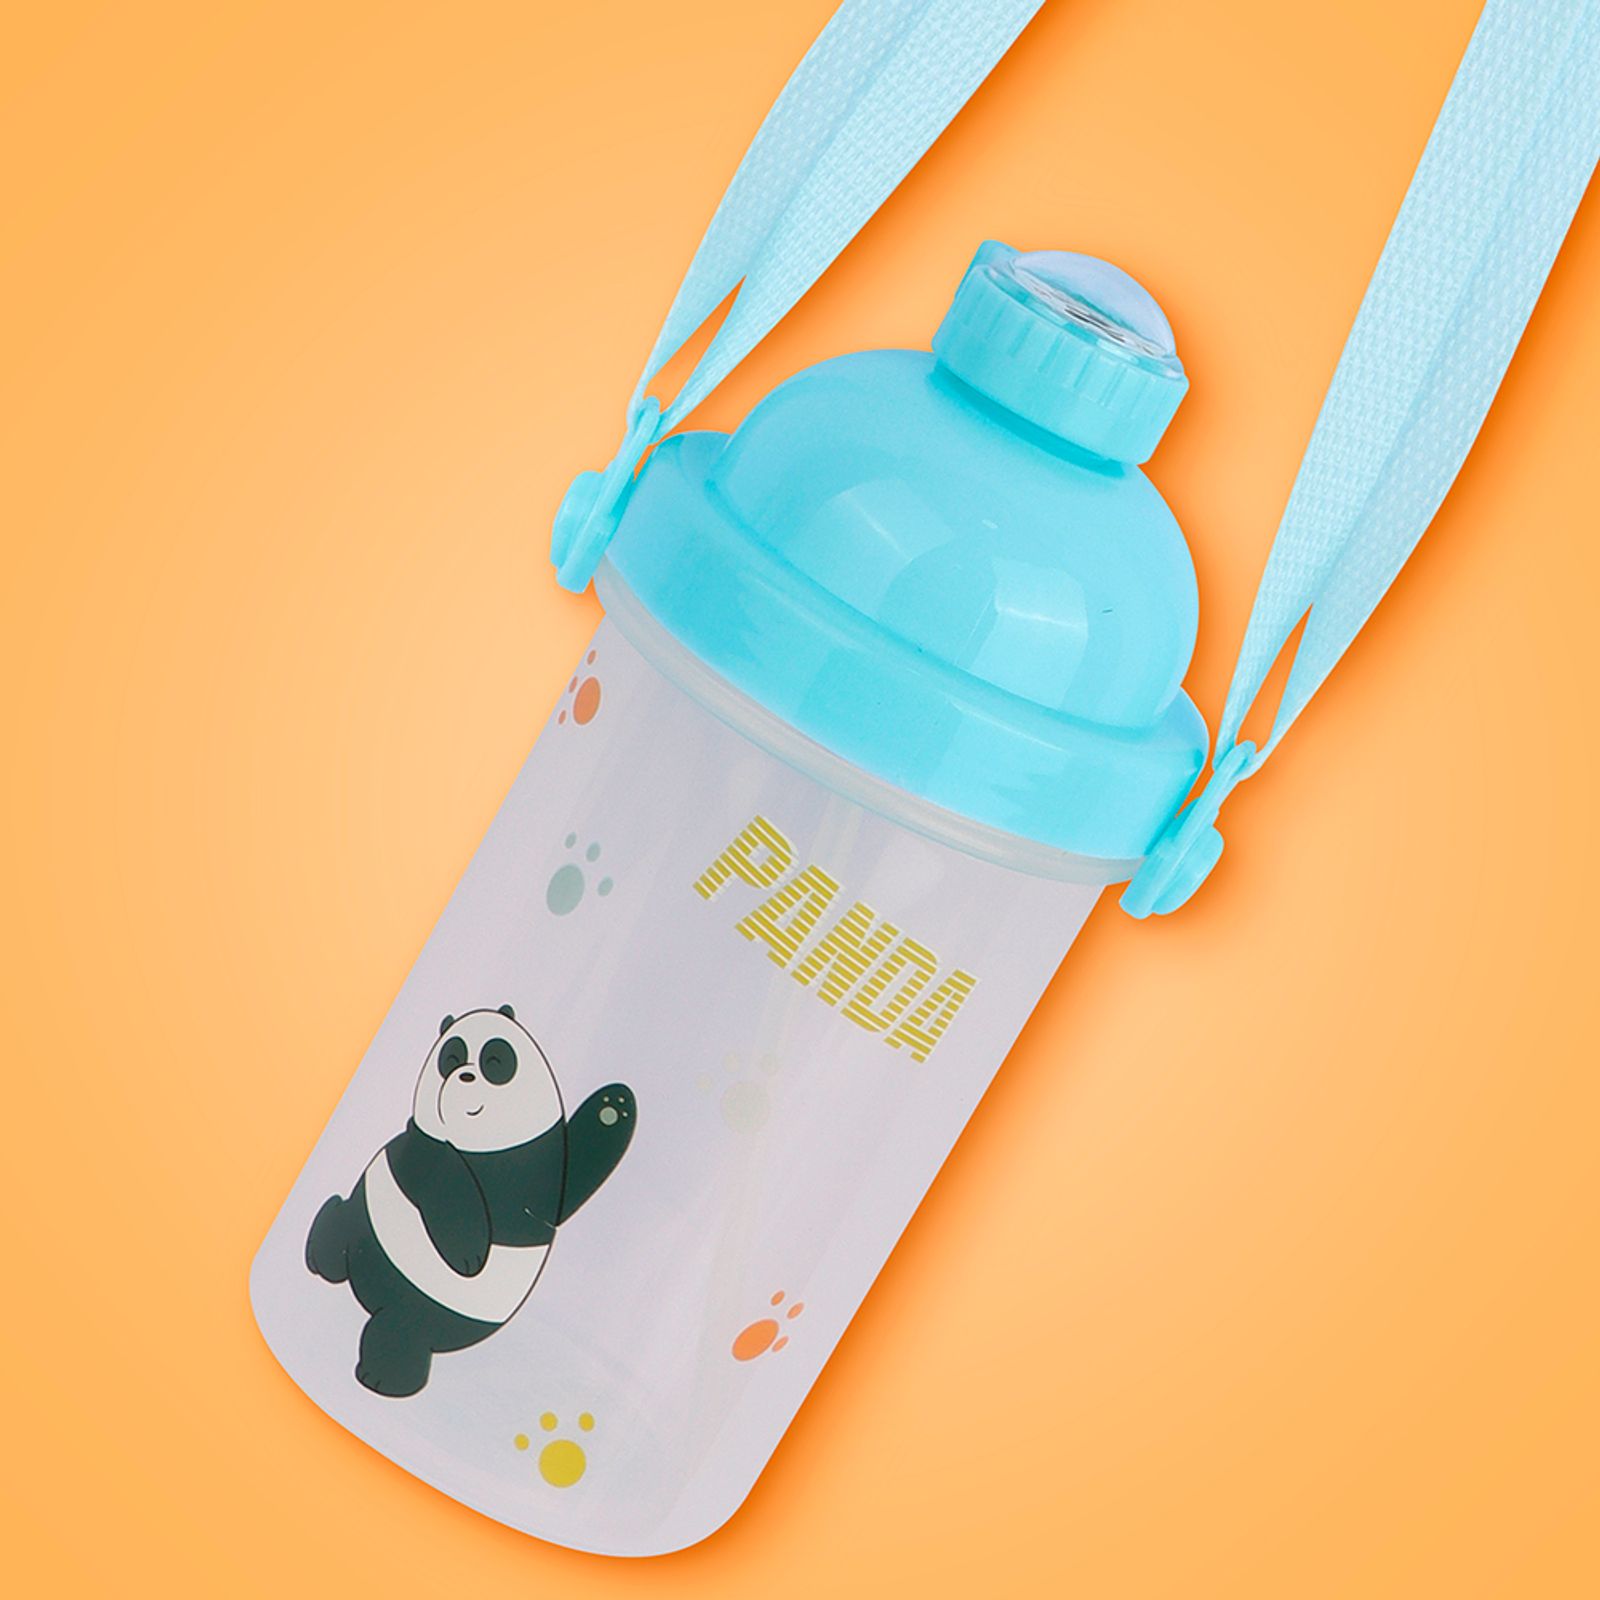 MINISO WE BARE BEARS COLLECTION 5.0 PLASTIC BOTTLE WITH SHOULDER STRAP ( 500ML ) ( PANDA ) 2014418612104 LIFE DEPARTMENT